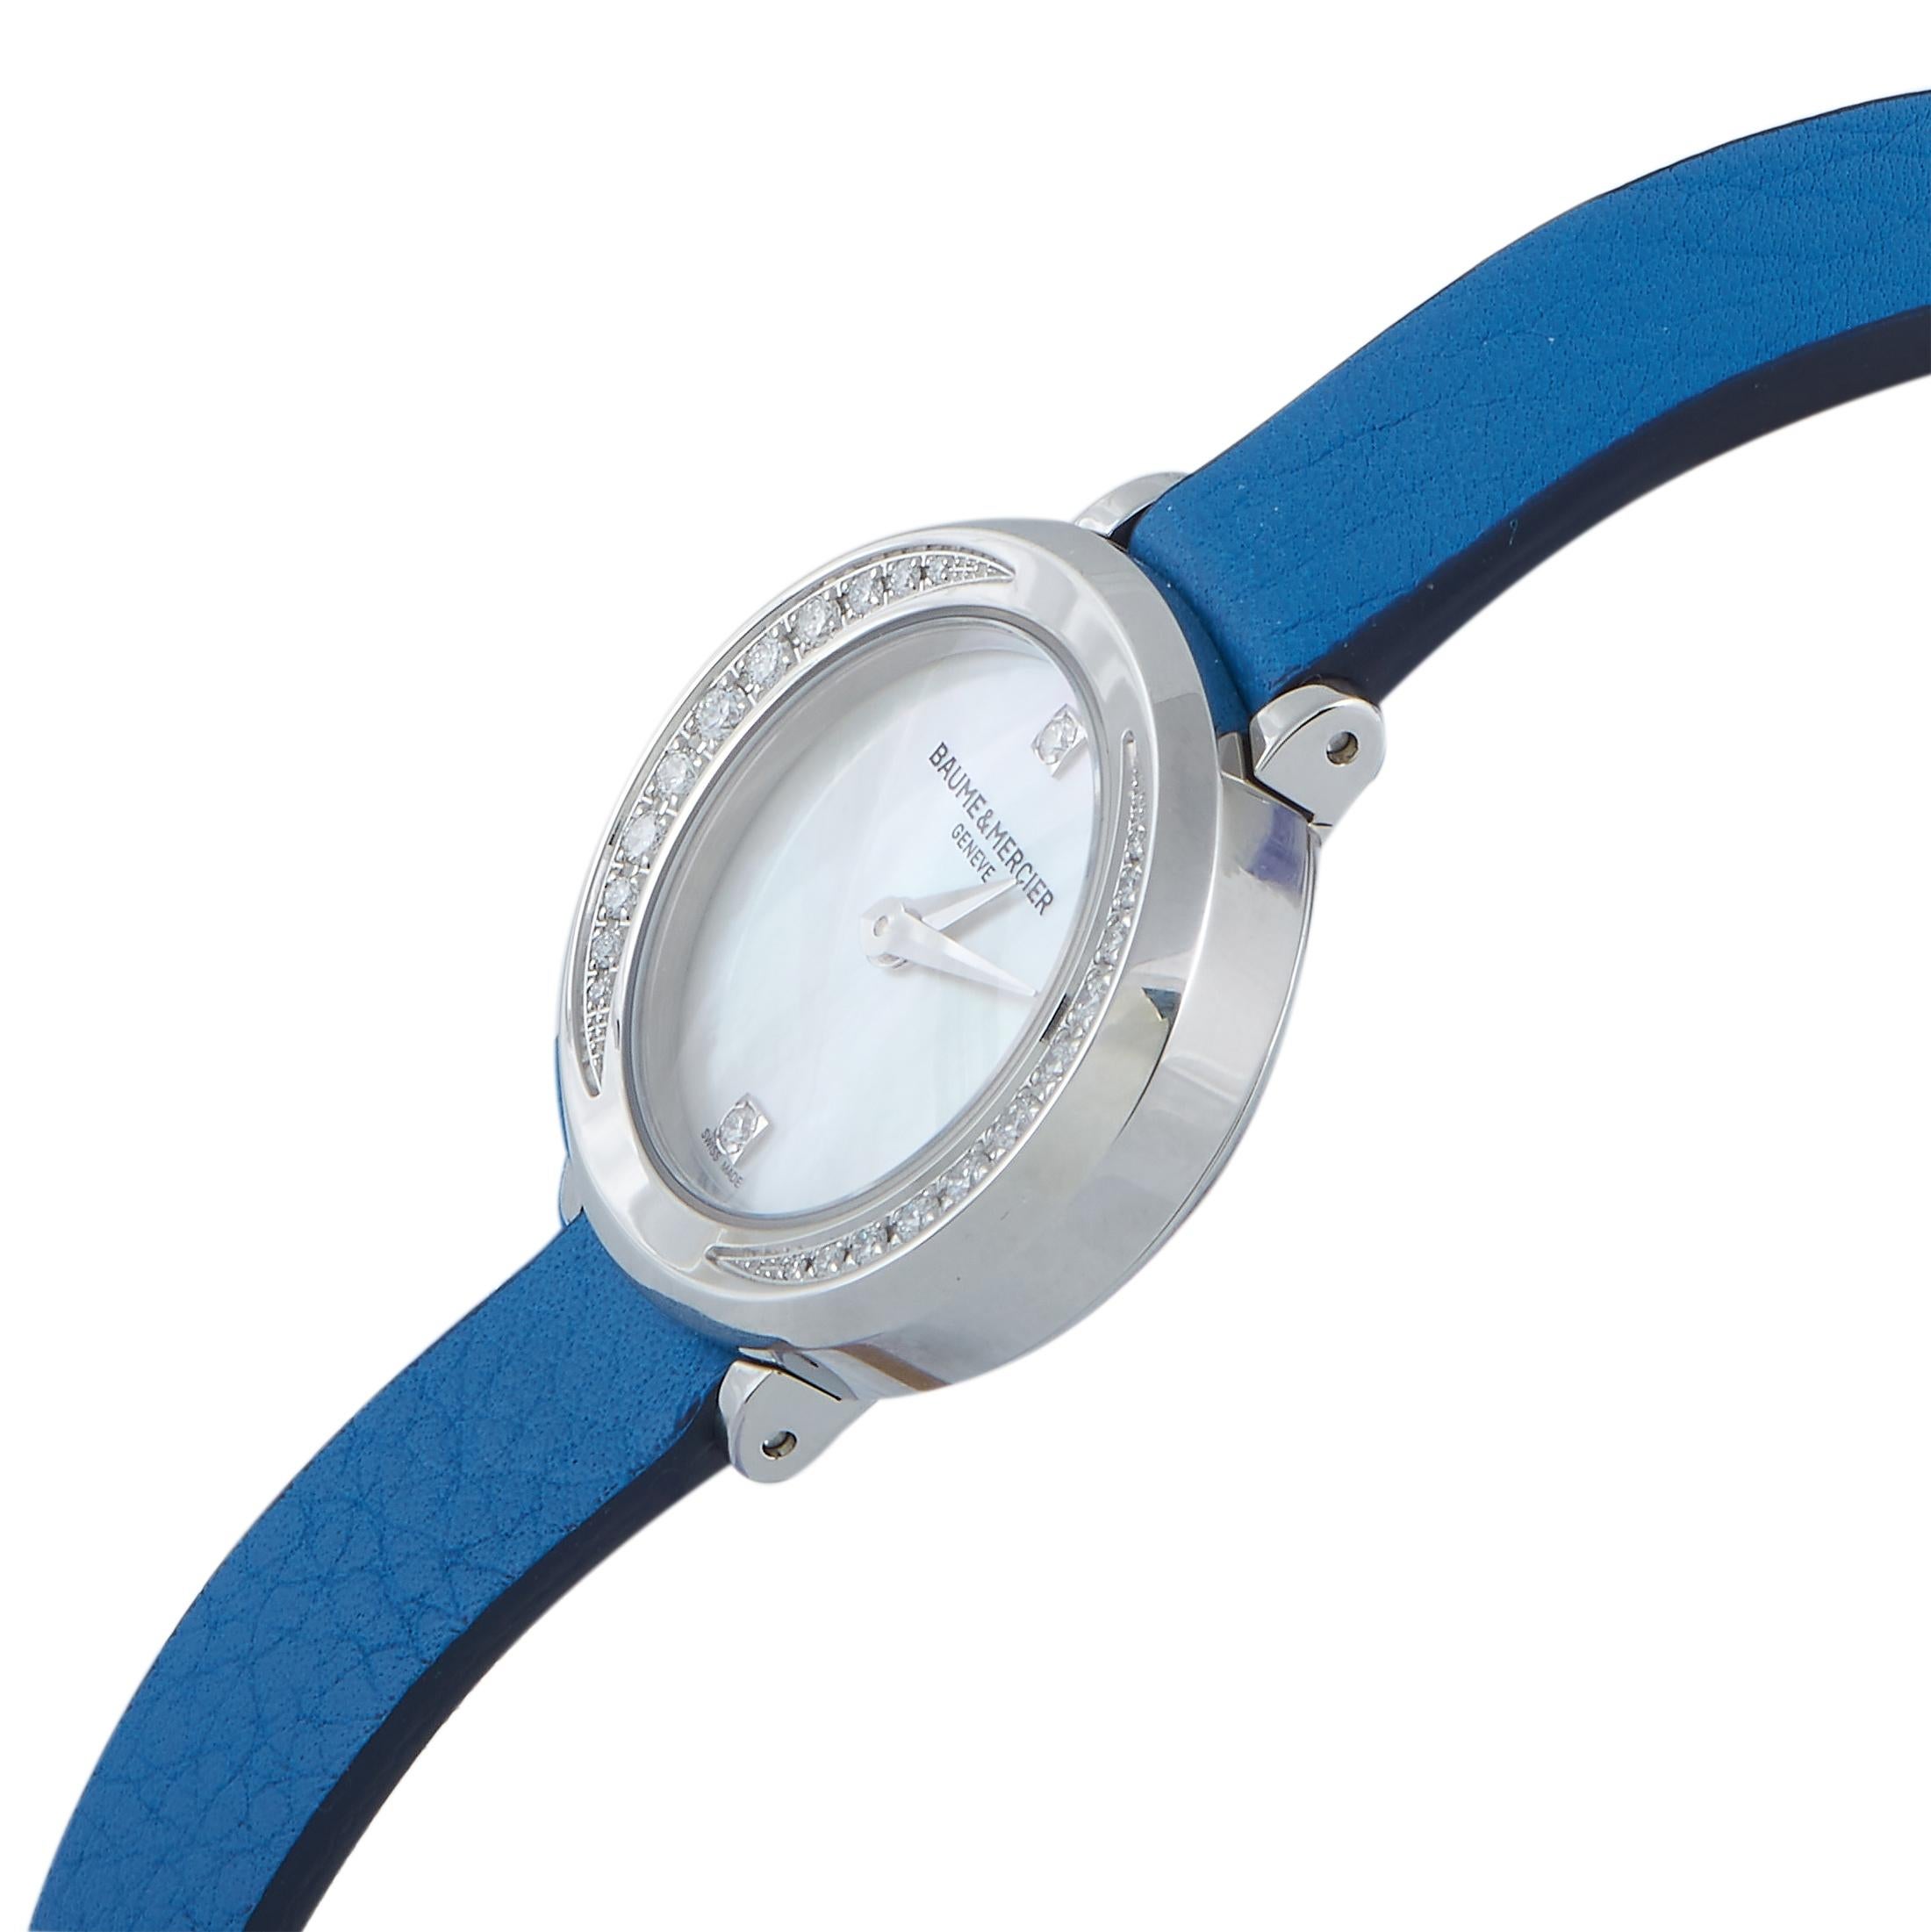 This is the Baume & Mercier Petite Promesse timepiece

The watch comes with a diamond-embellished stainless steel case that measures 22 mm in diameter. The case is mounted onto a wrap-around blue calfskin strap, secured on the wrist with a tang